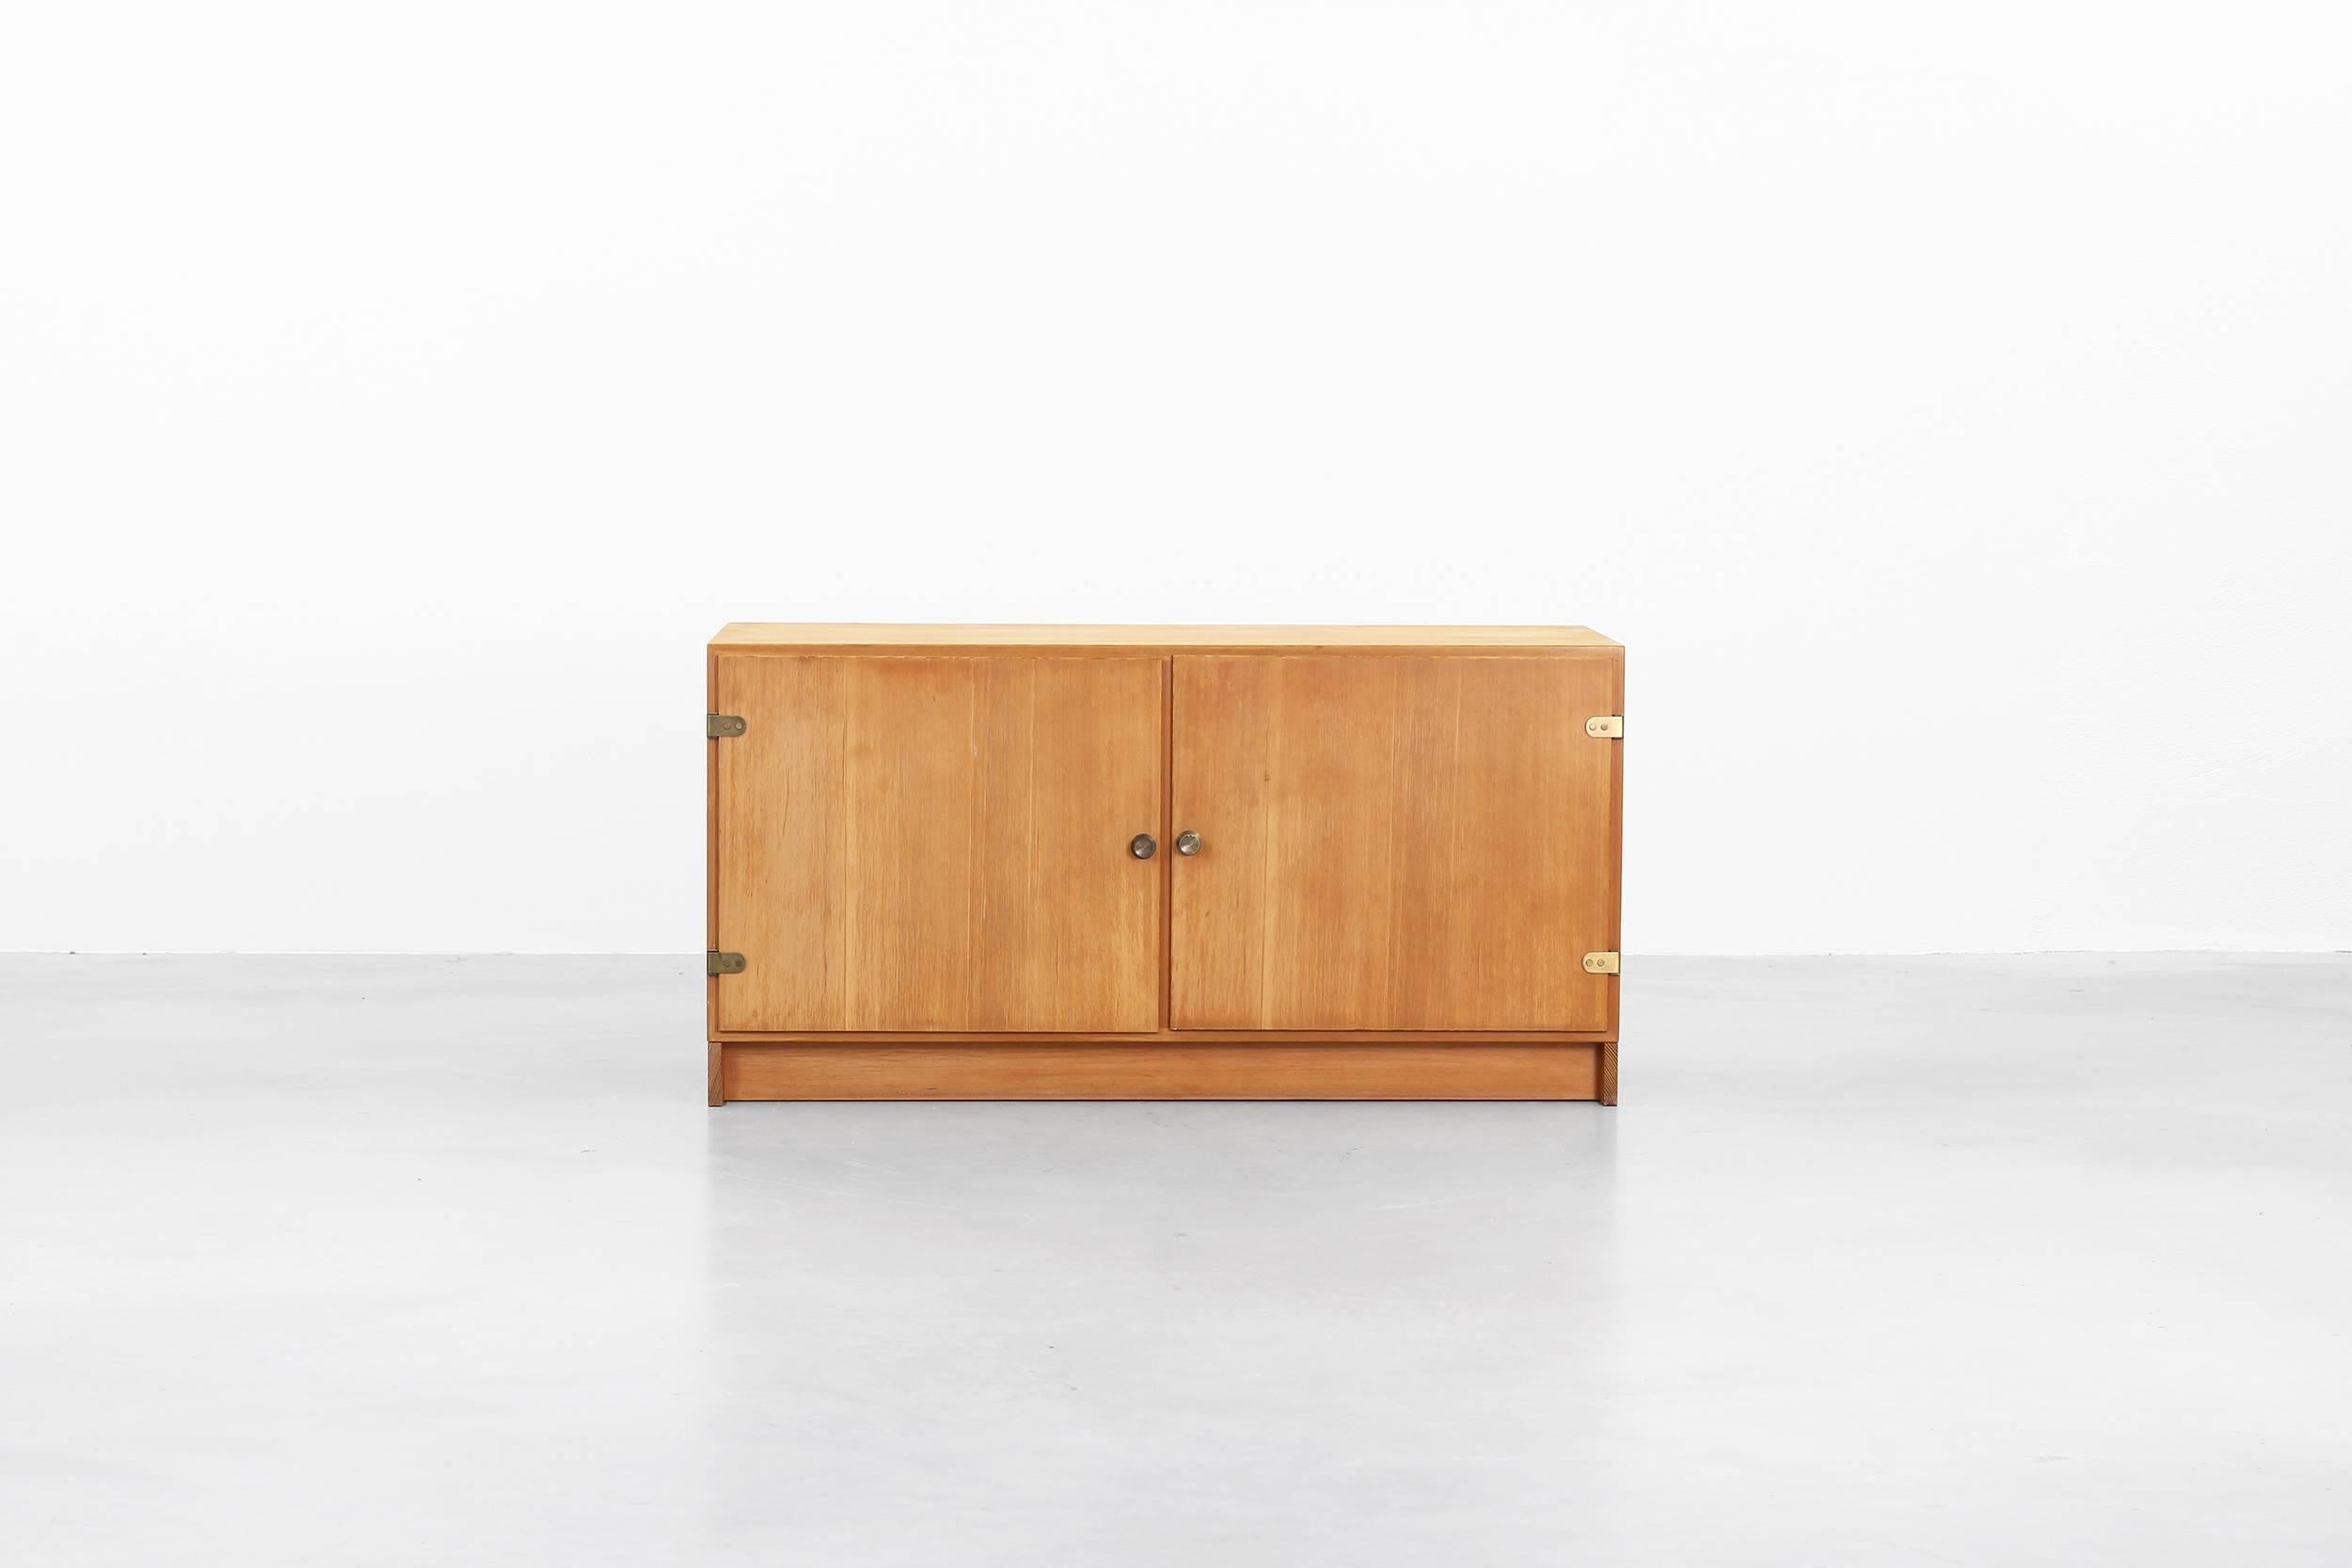 Beautiful sideboard by Børge Mogensen for Karl Andersson & Söner made in Sweden. The sideboard is in a very good condition with little signs of use and made of larch.

We offer worldwide shipping. Please contact us for a shipping quote.